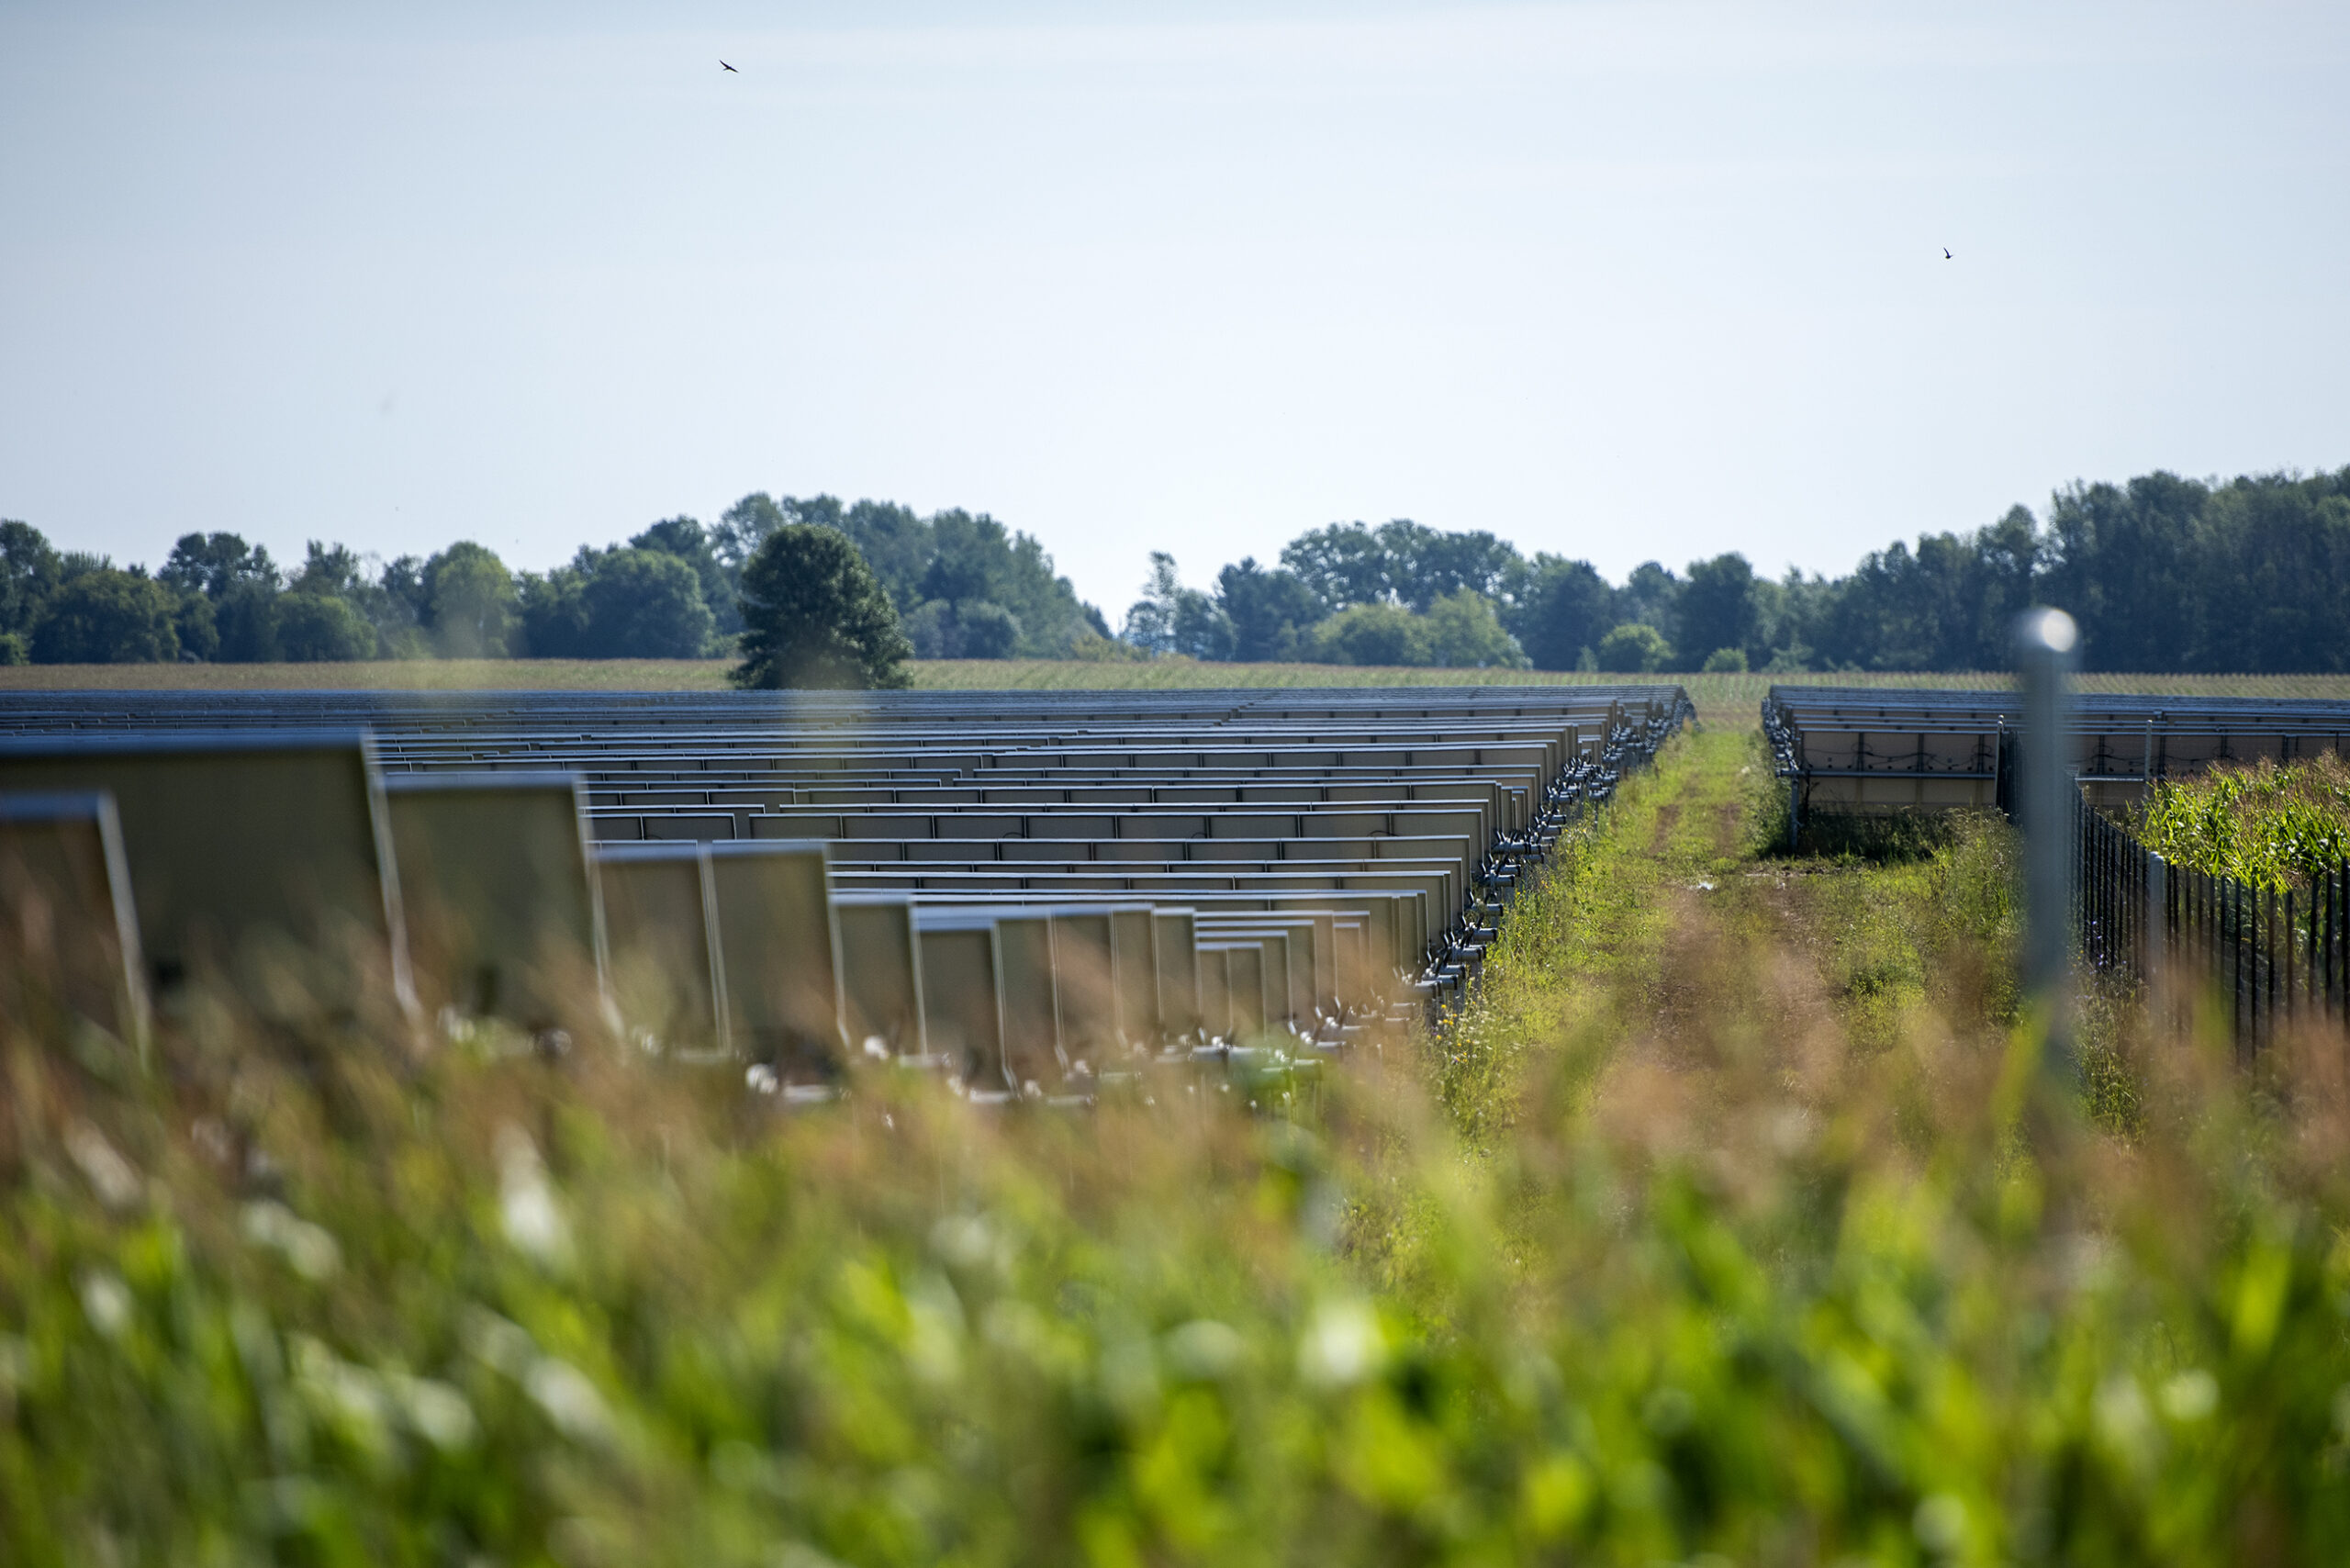 Rows of solar panels are seen behind corn.